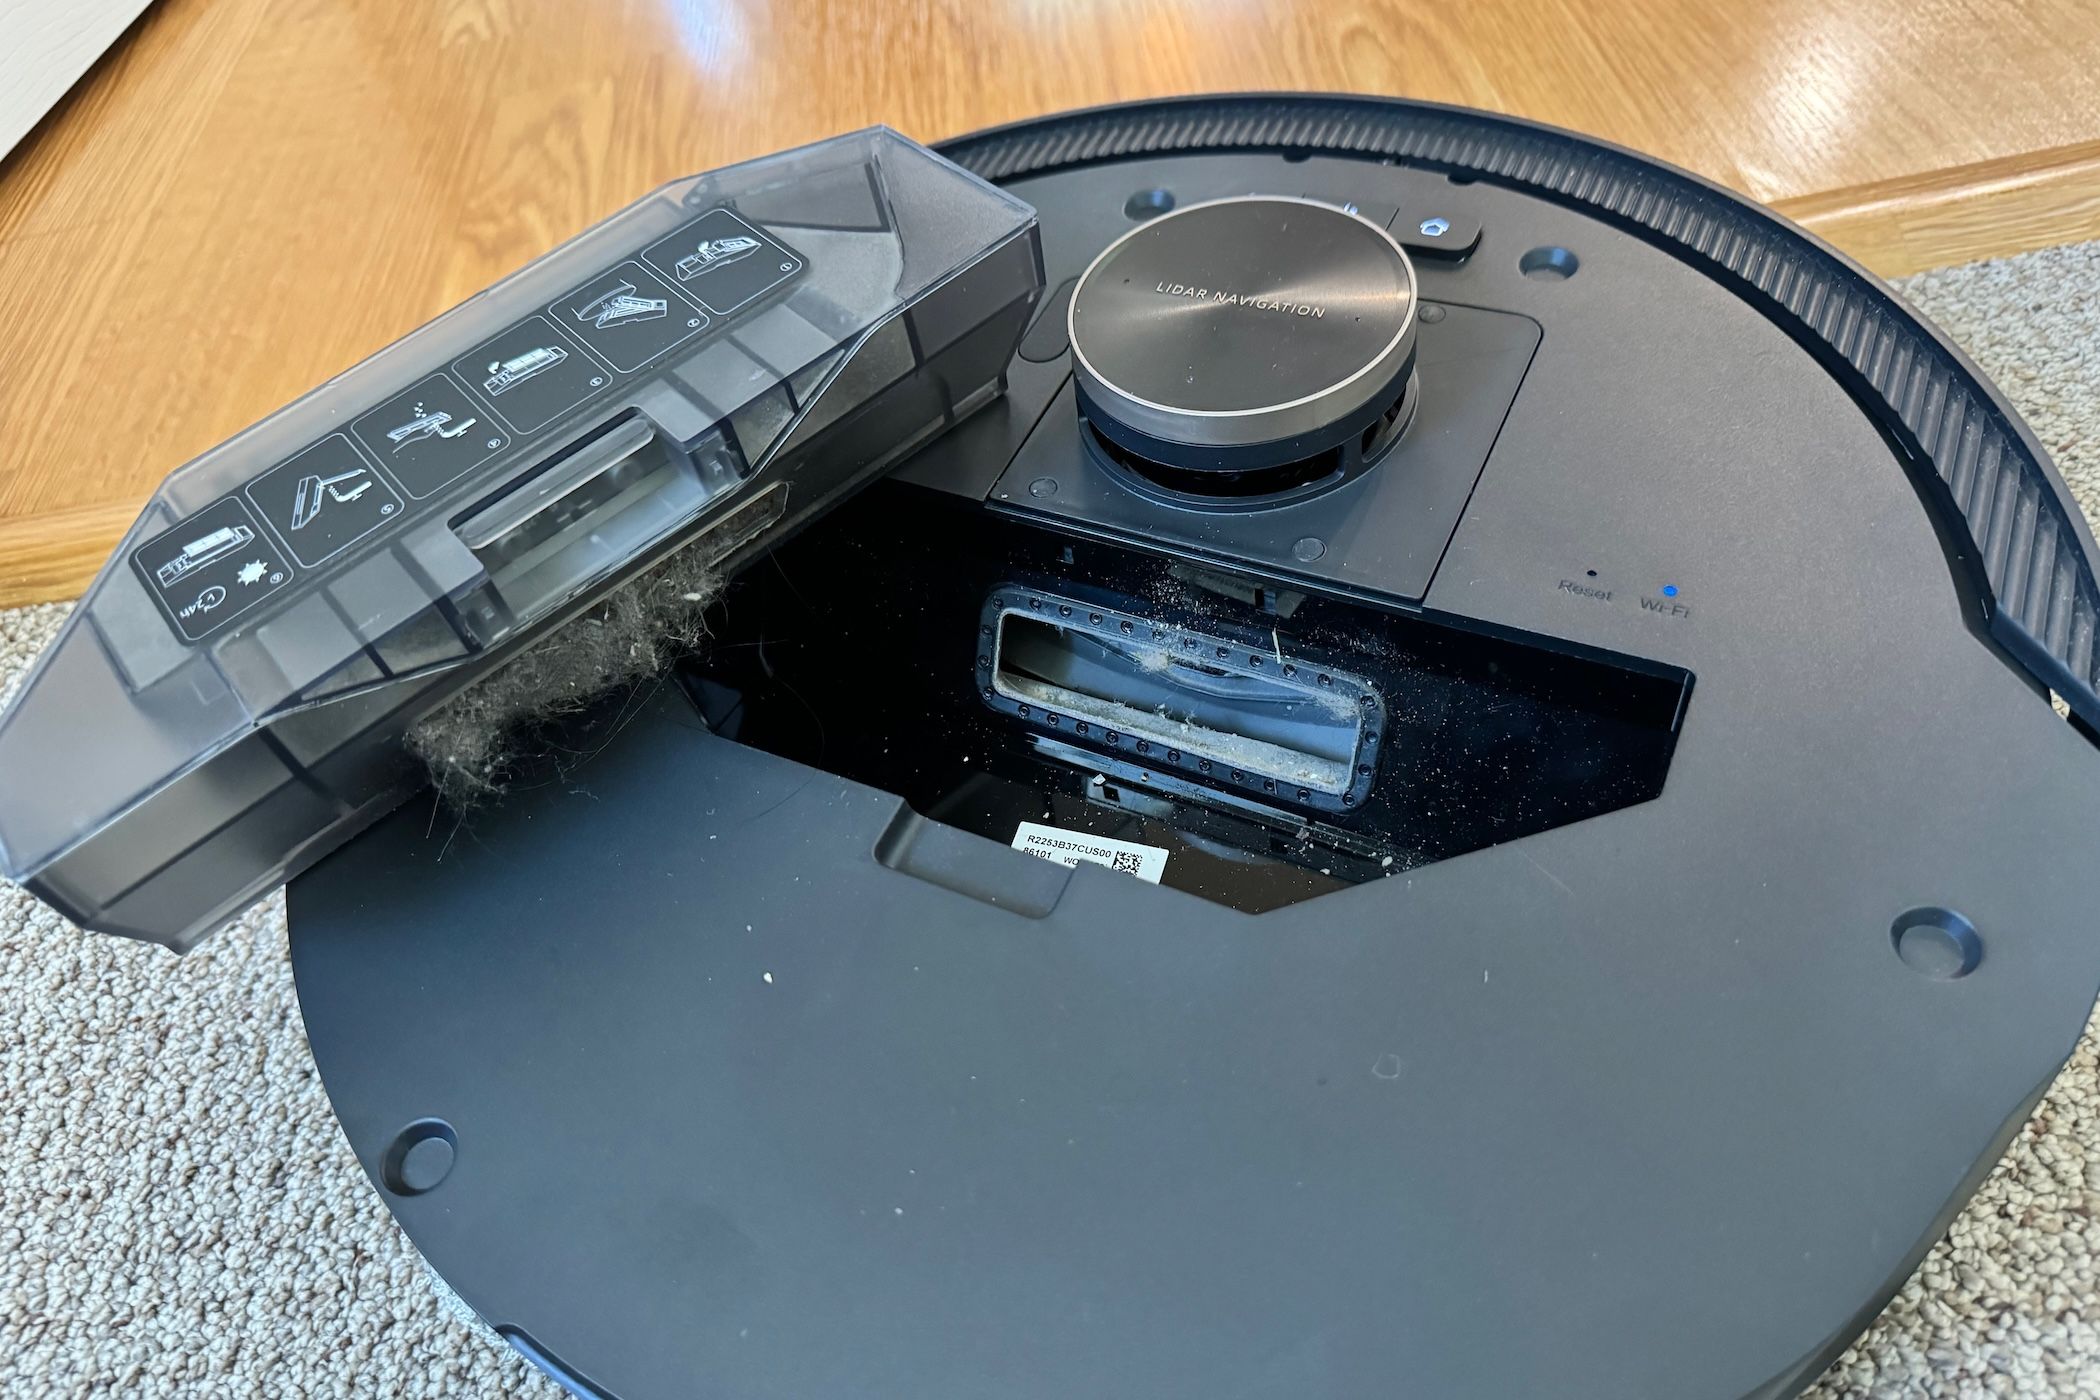 Dreame L20 Ultra Robot Vacuum Cleaner